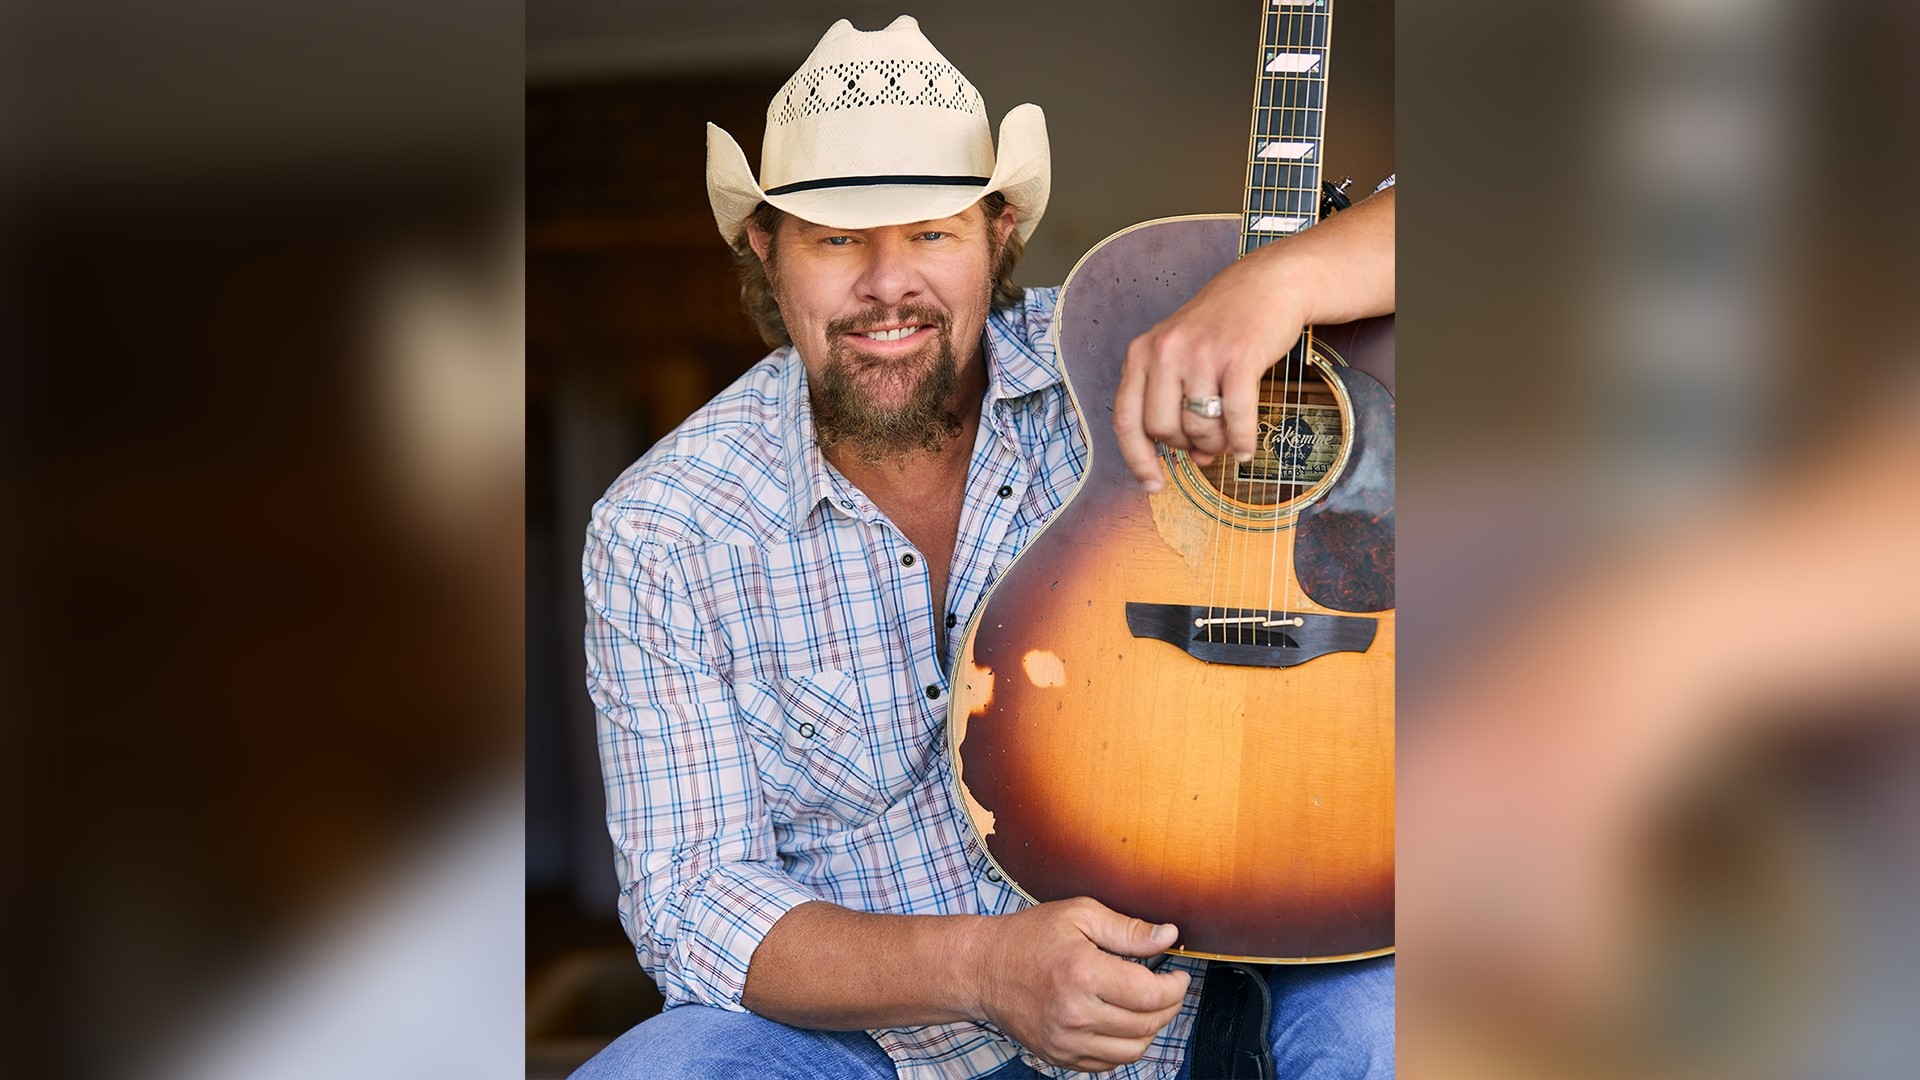 The country music star will "probably be out fishin'" this summer after his acquisition of Luck E Strike.